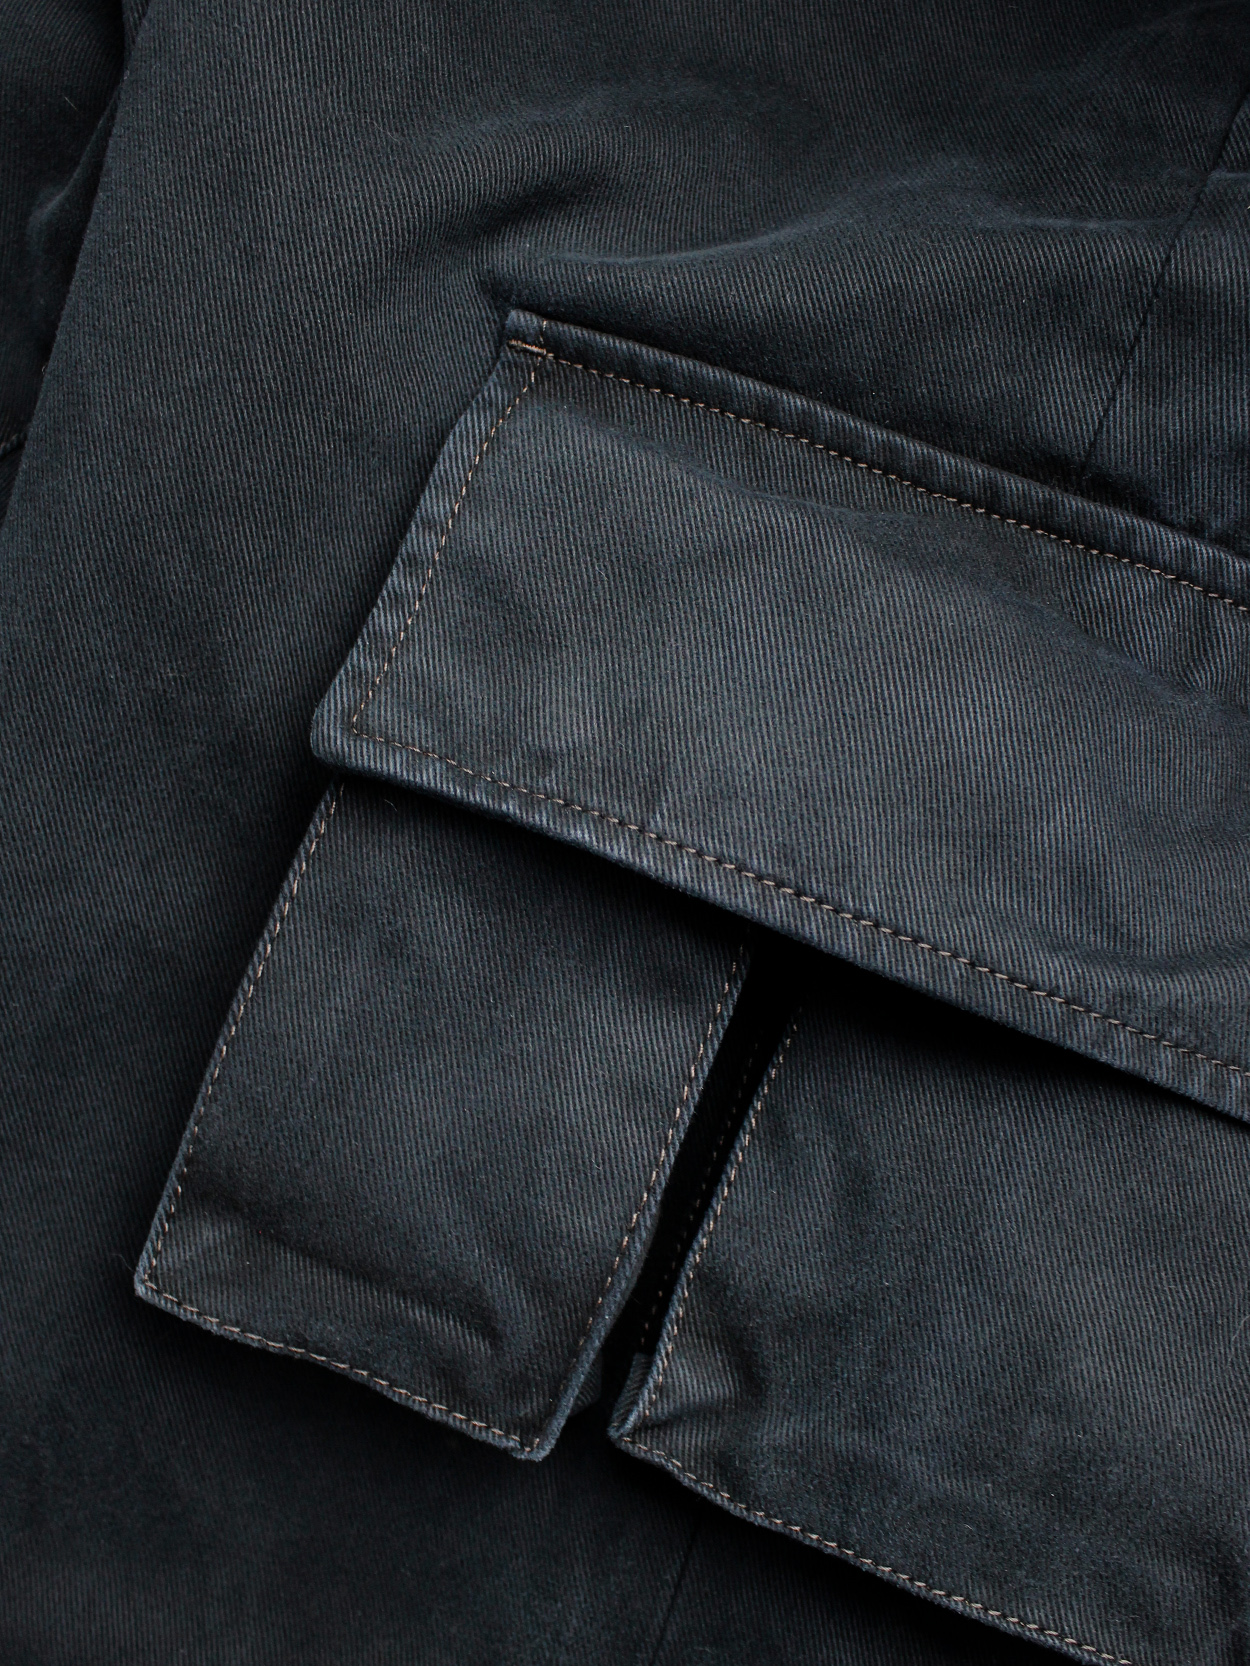 Yohji Yamamoto A.A.R black cargo trousers with pockets on the legs - V ...